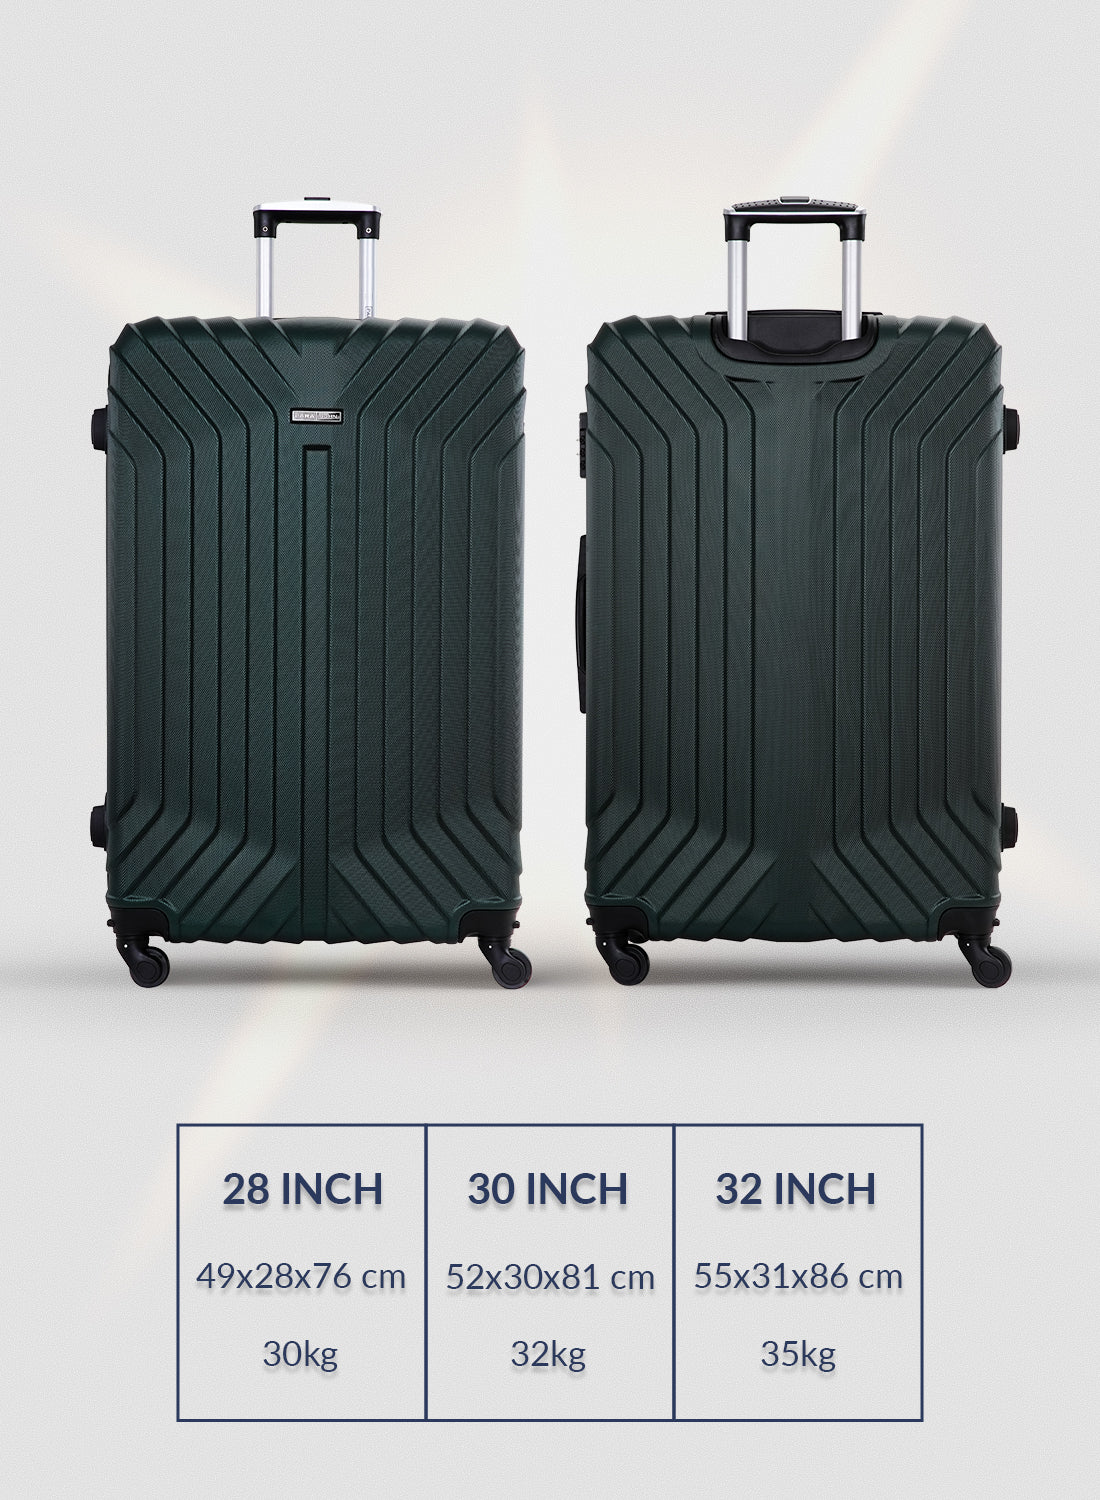 Parajohn Lightweight 3-Pieces Polypropylene Hard side Travel Luggage Trolley Bag Set with Lock for men / women / unisex Hard shell strong